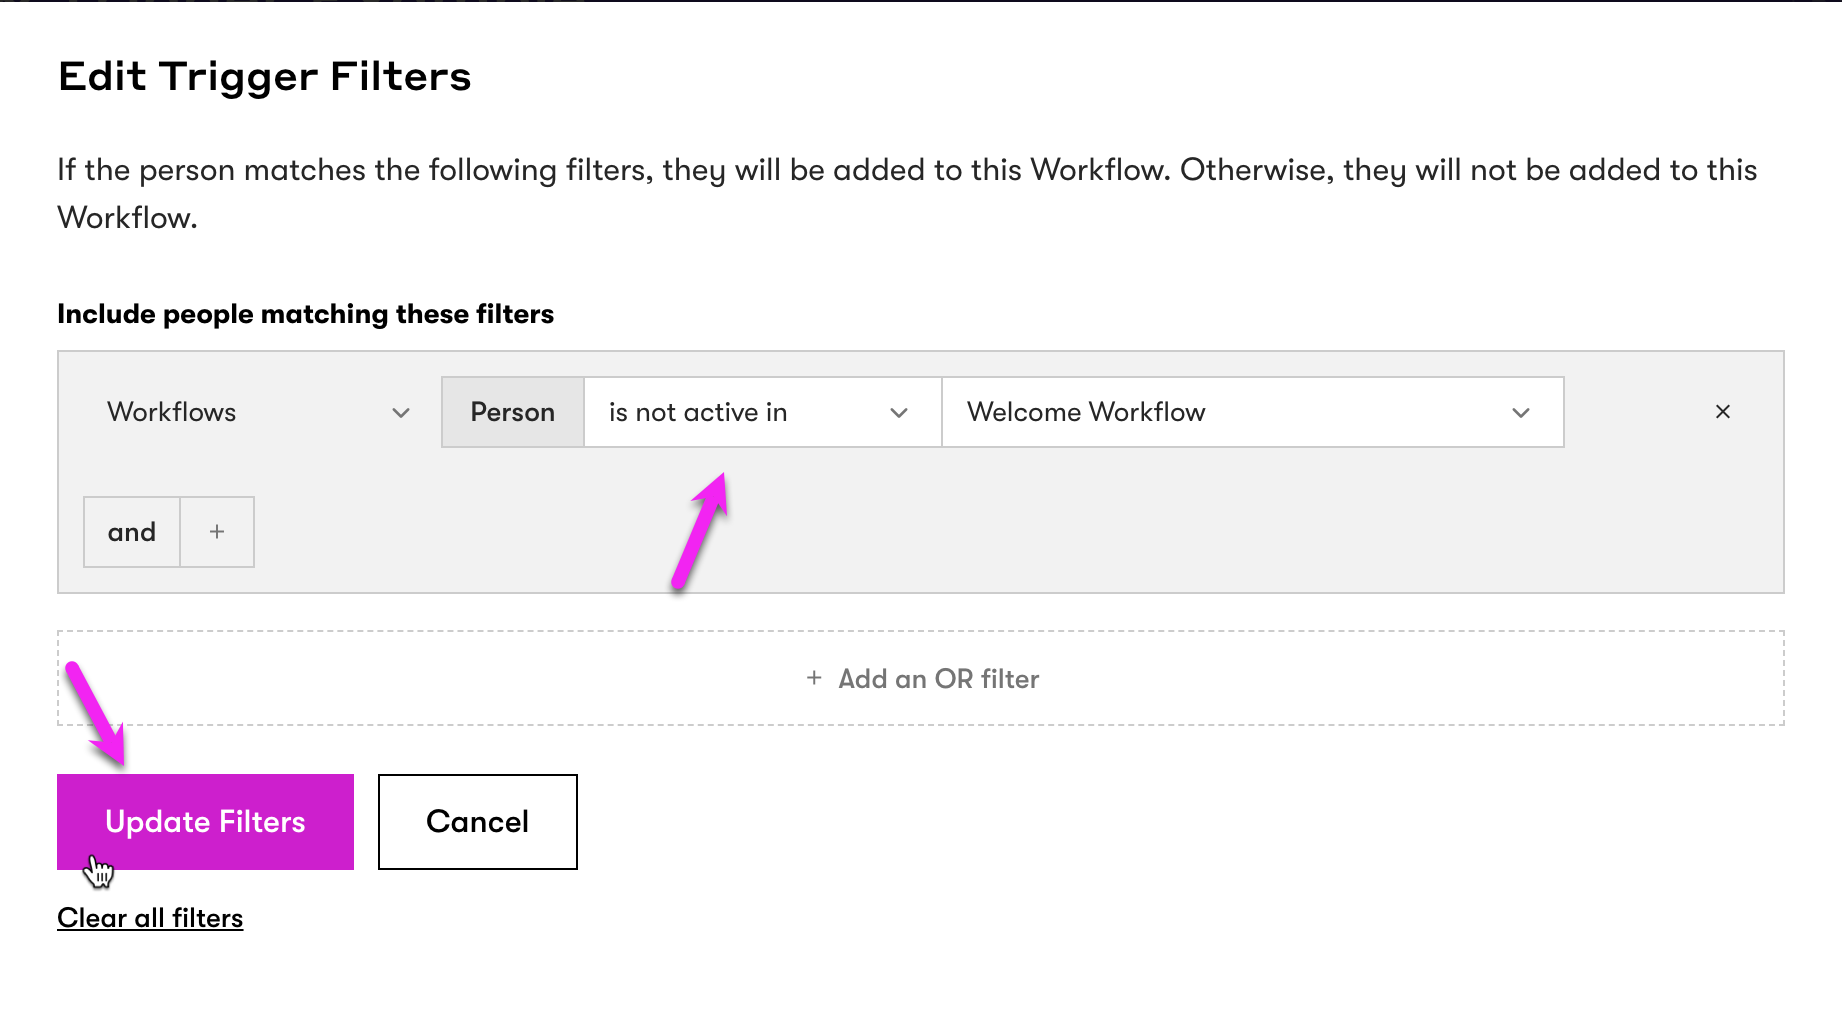 Edit Trigger automation segment to filter out a person that is in a welcome workflow actively followed by an update filter button